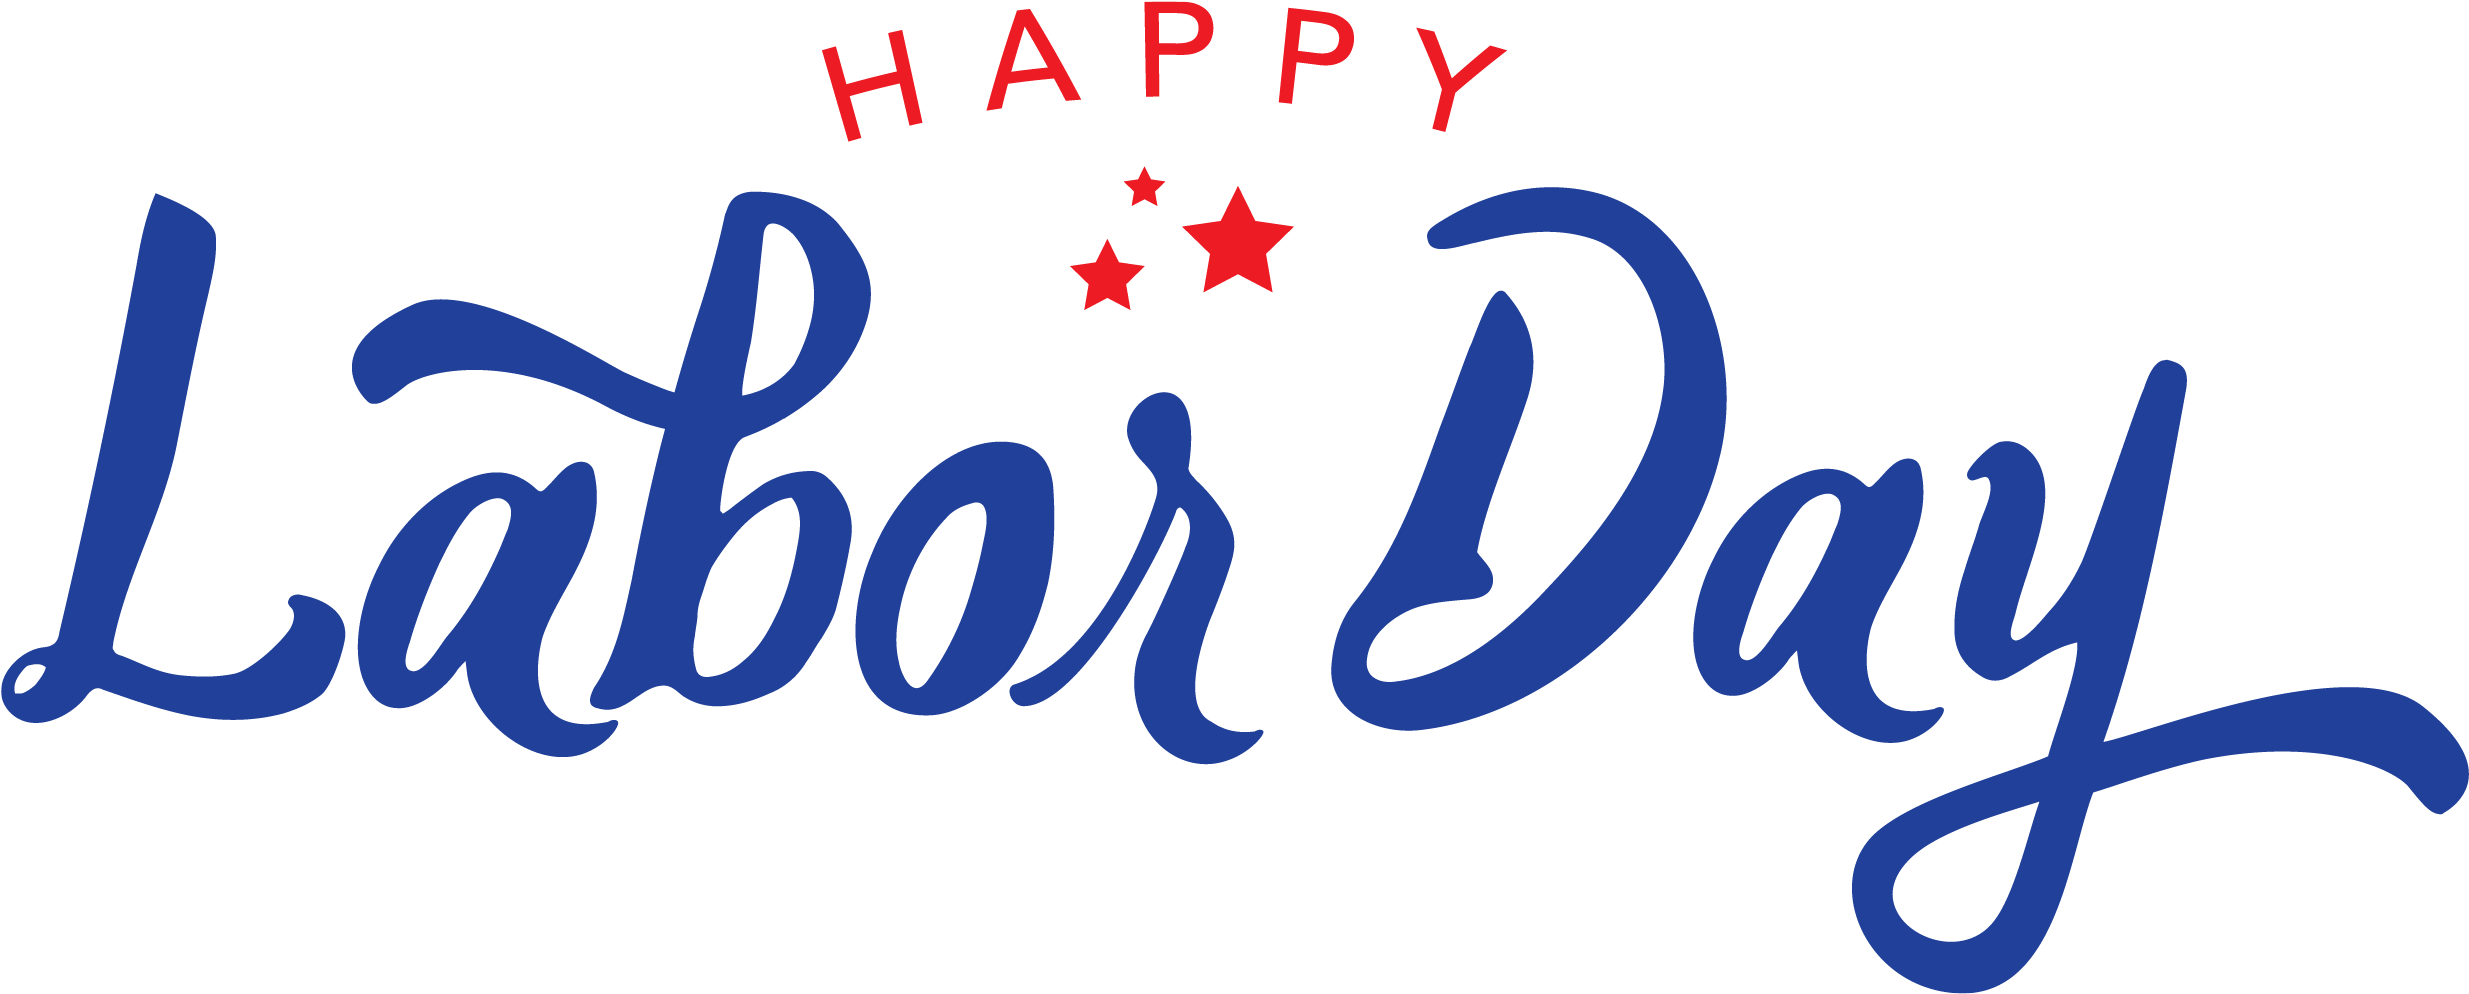 Happy Labor Day Text Transparent Free PNG